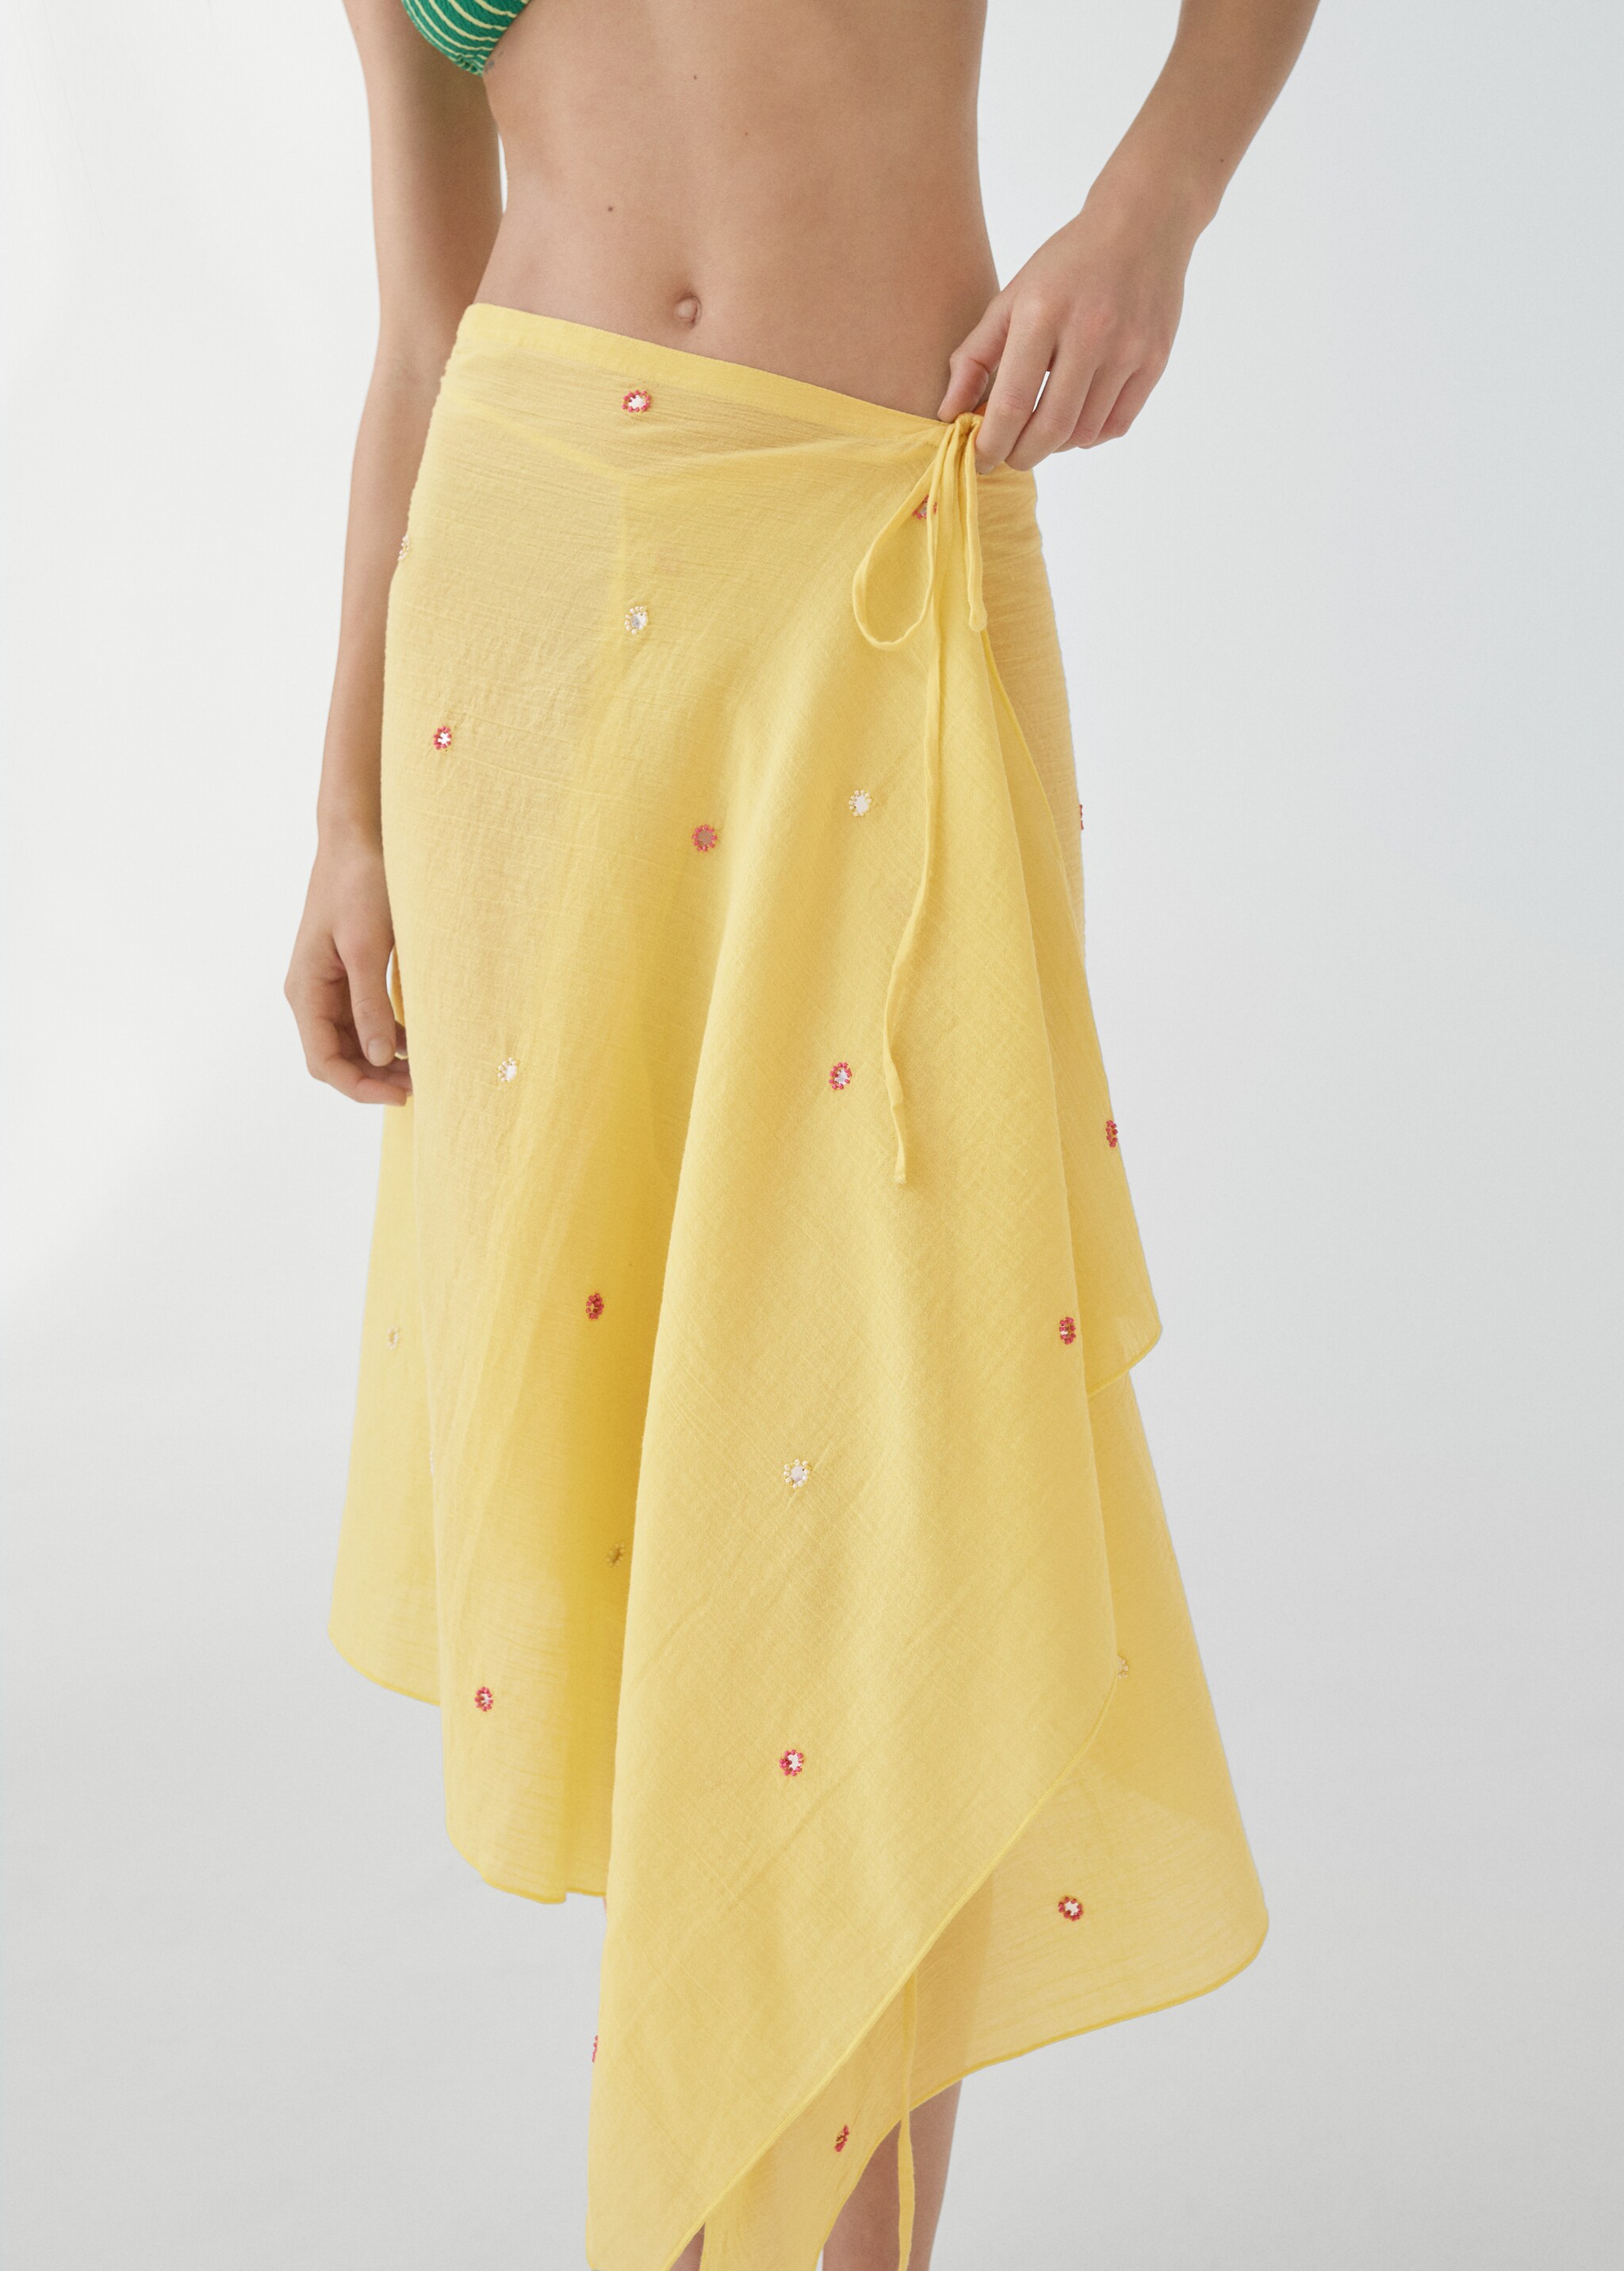 Pareo skirt with embroidered details - Medium plane